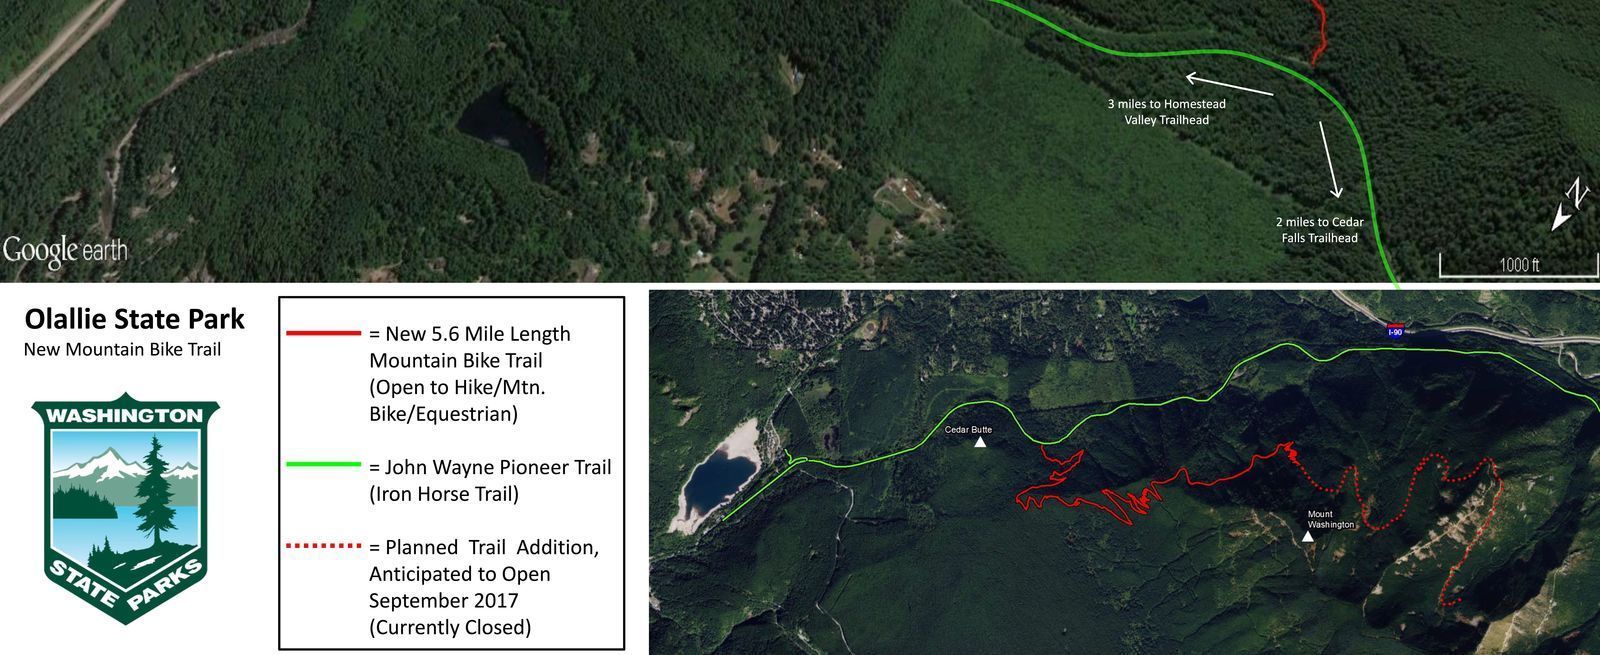 New Trail Opening in Olallie State Park on Saturday July 29th